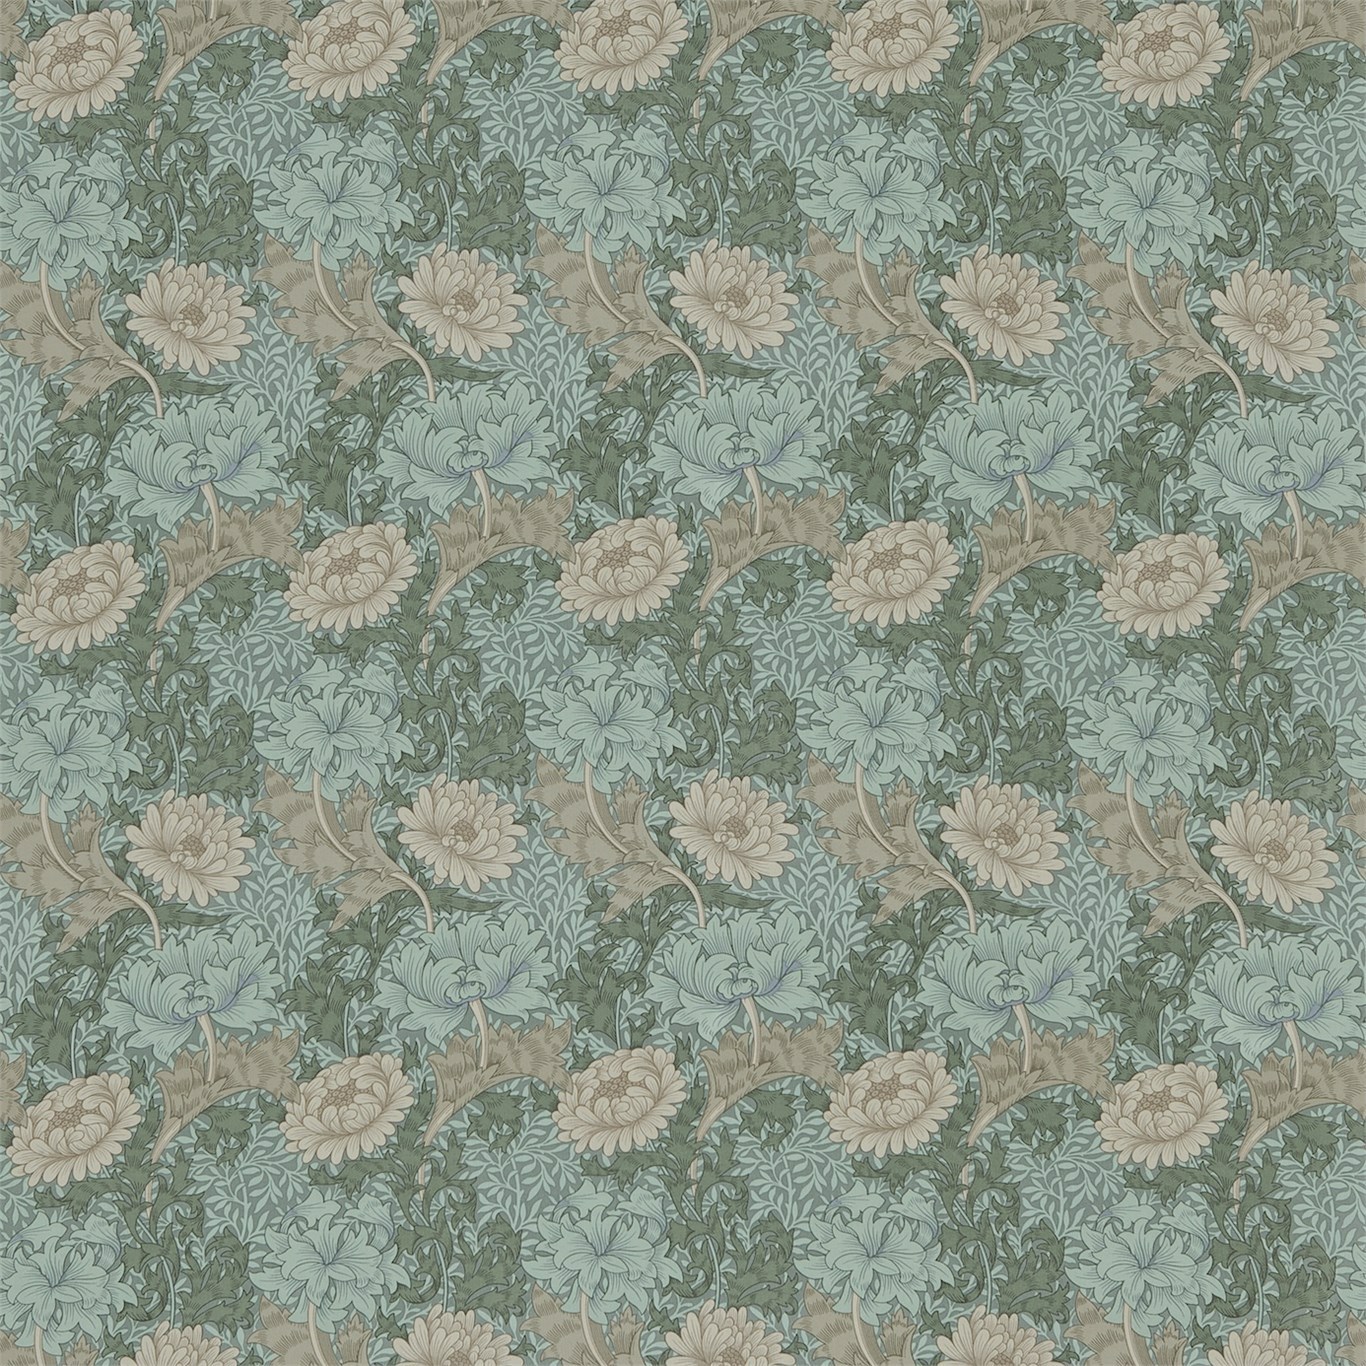 Chrysanthemum Green/Biscuit Fabric by MOR